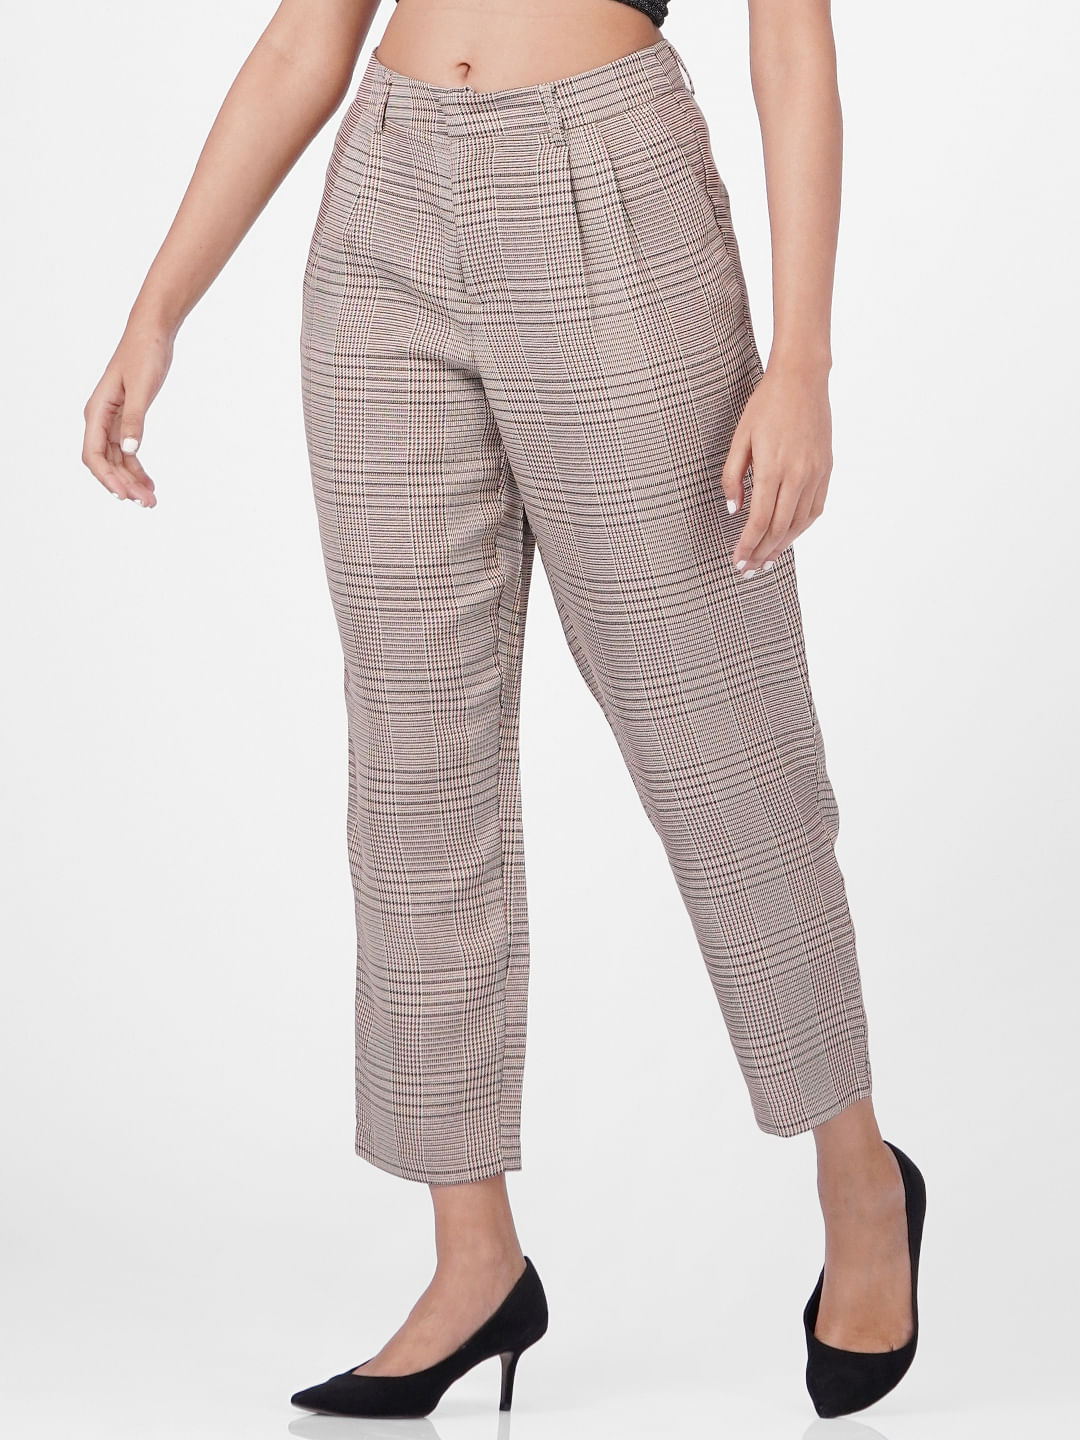 Grey Checked Trousers  Women  George at ASDA